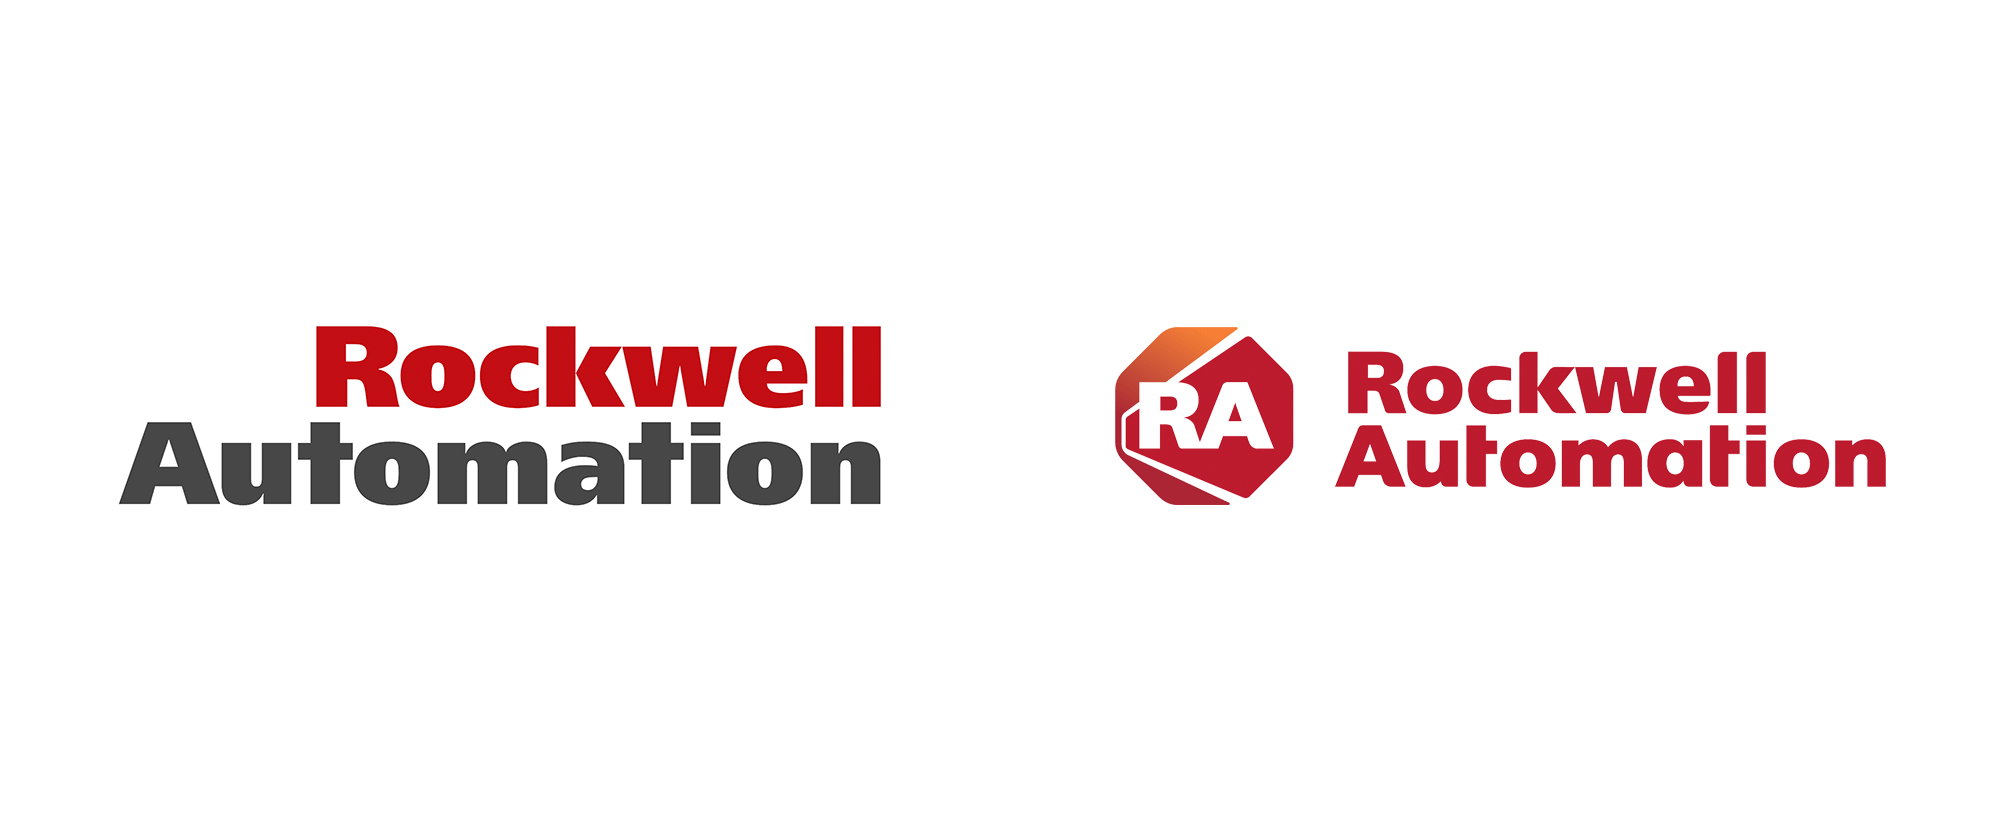 Rockwell Logo - Brand New: New Logo for Rockwell Automation